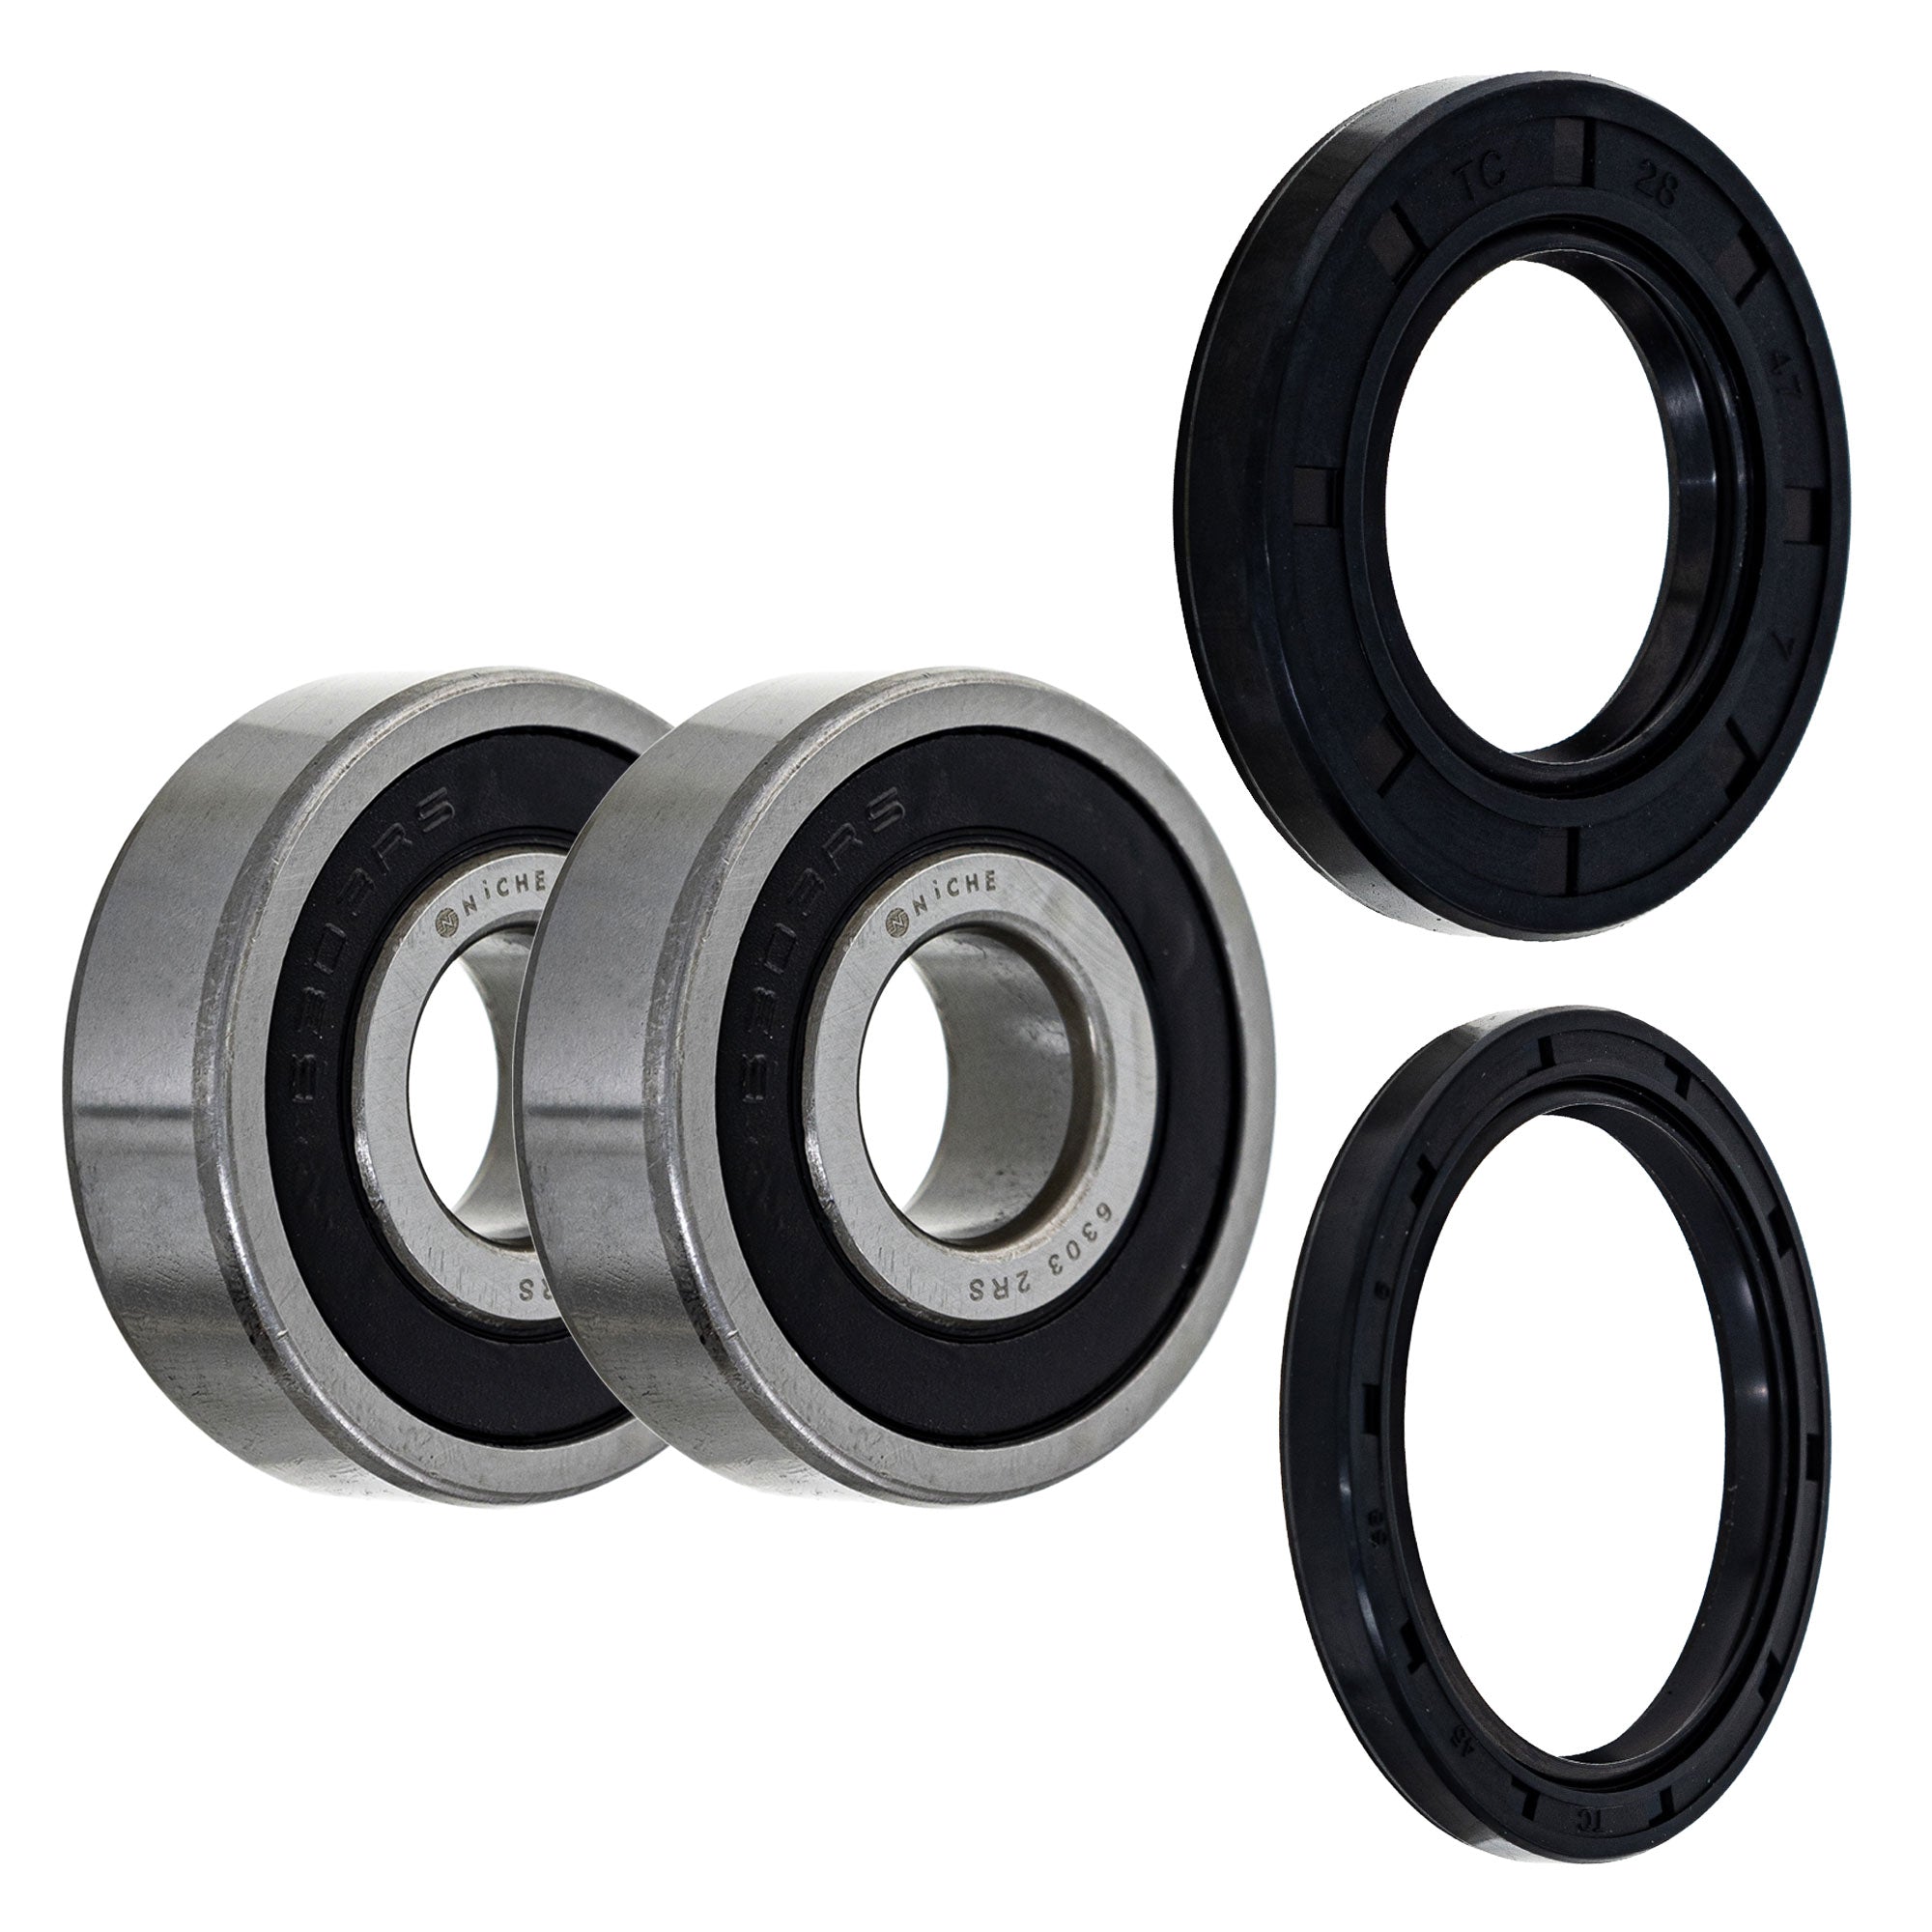 Wheel Bearing Seal Kit for zOTHER RD350 Bolt NICHE MK1009042